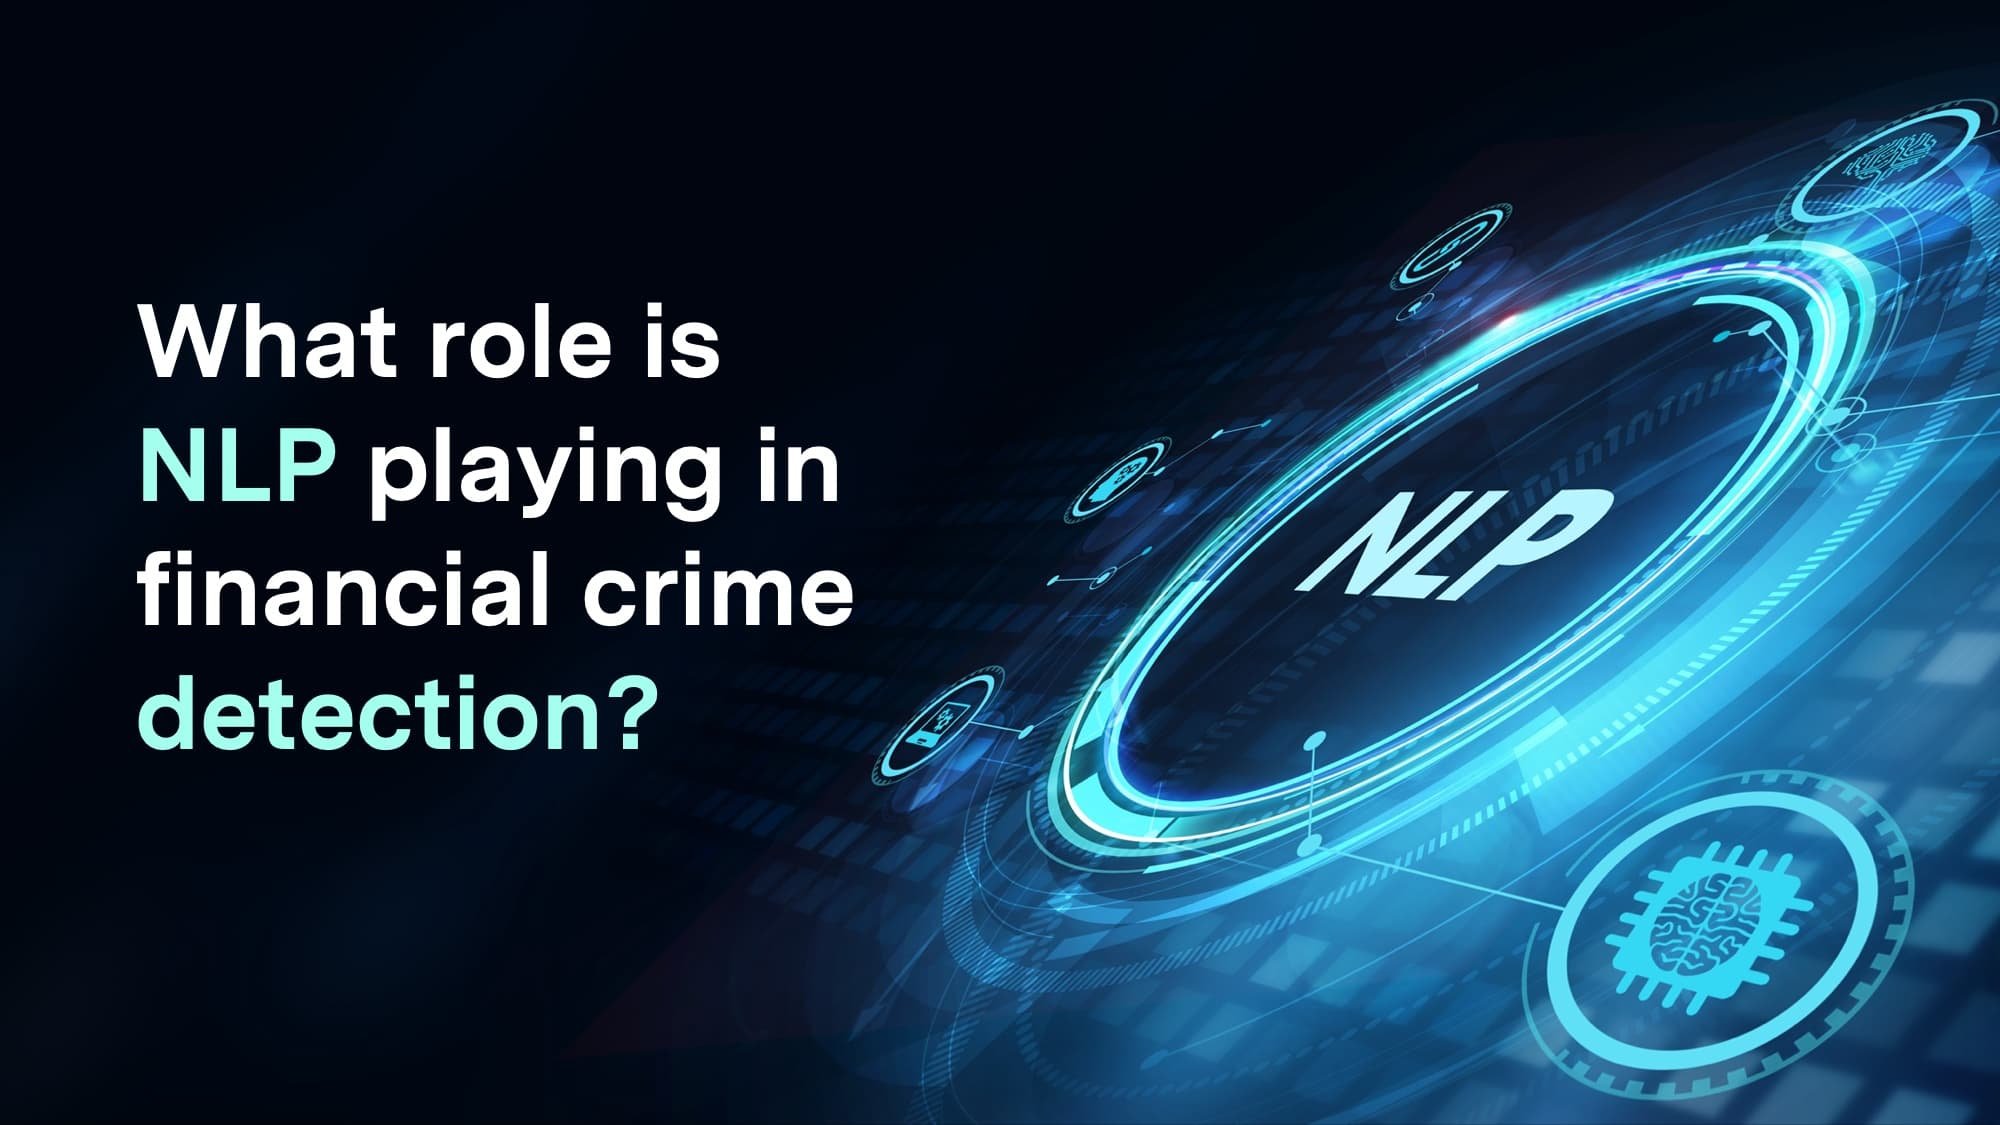 What role is NLP playing in financial crime detection?